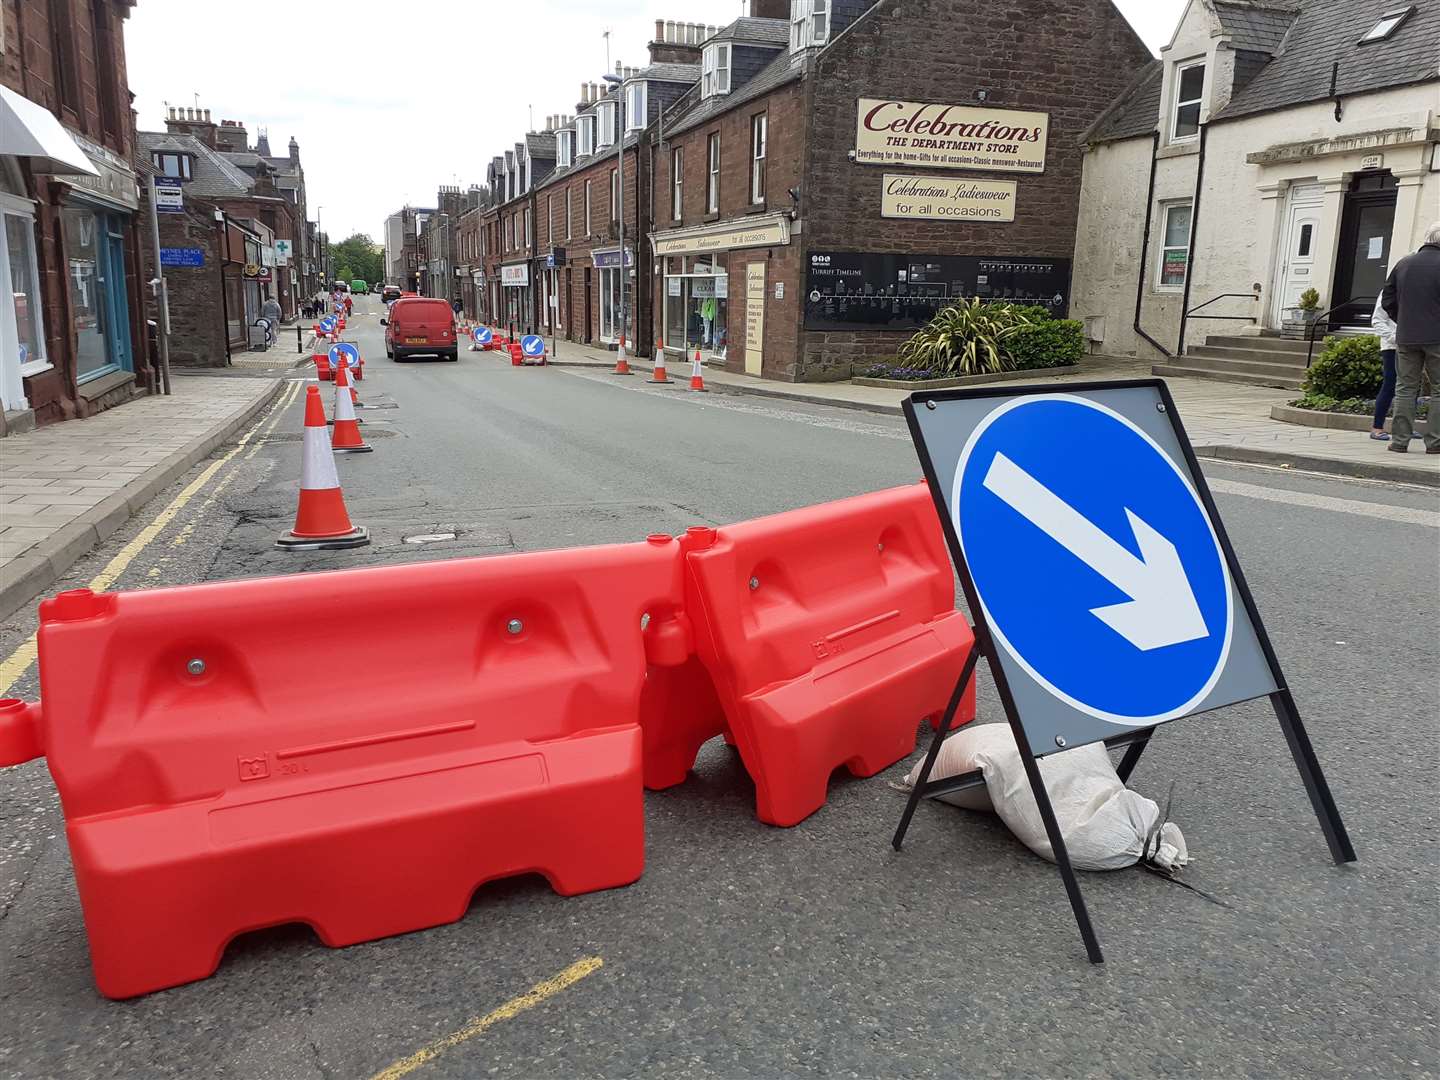 Parking and one way restructions were introduced on Turriff's Main Street.